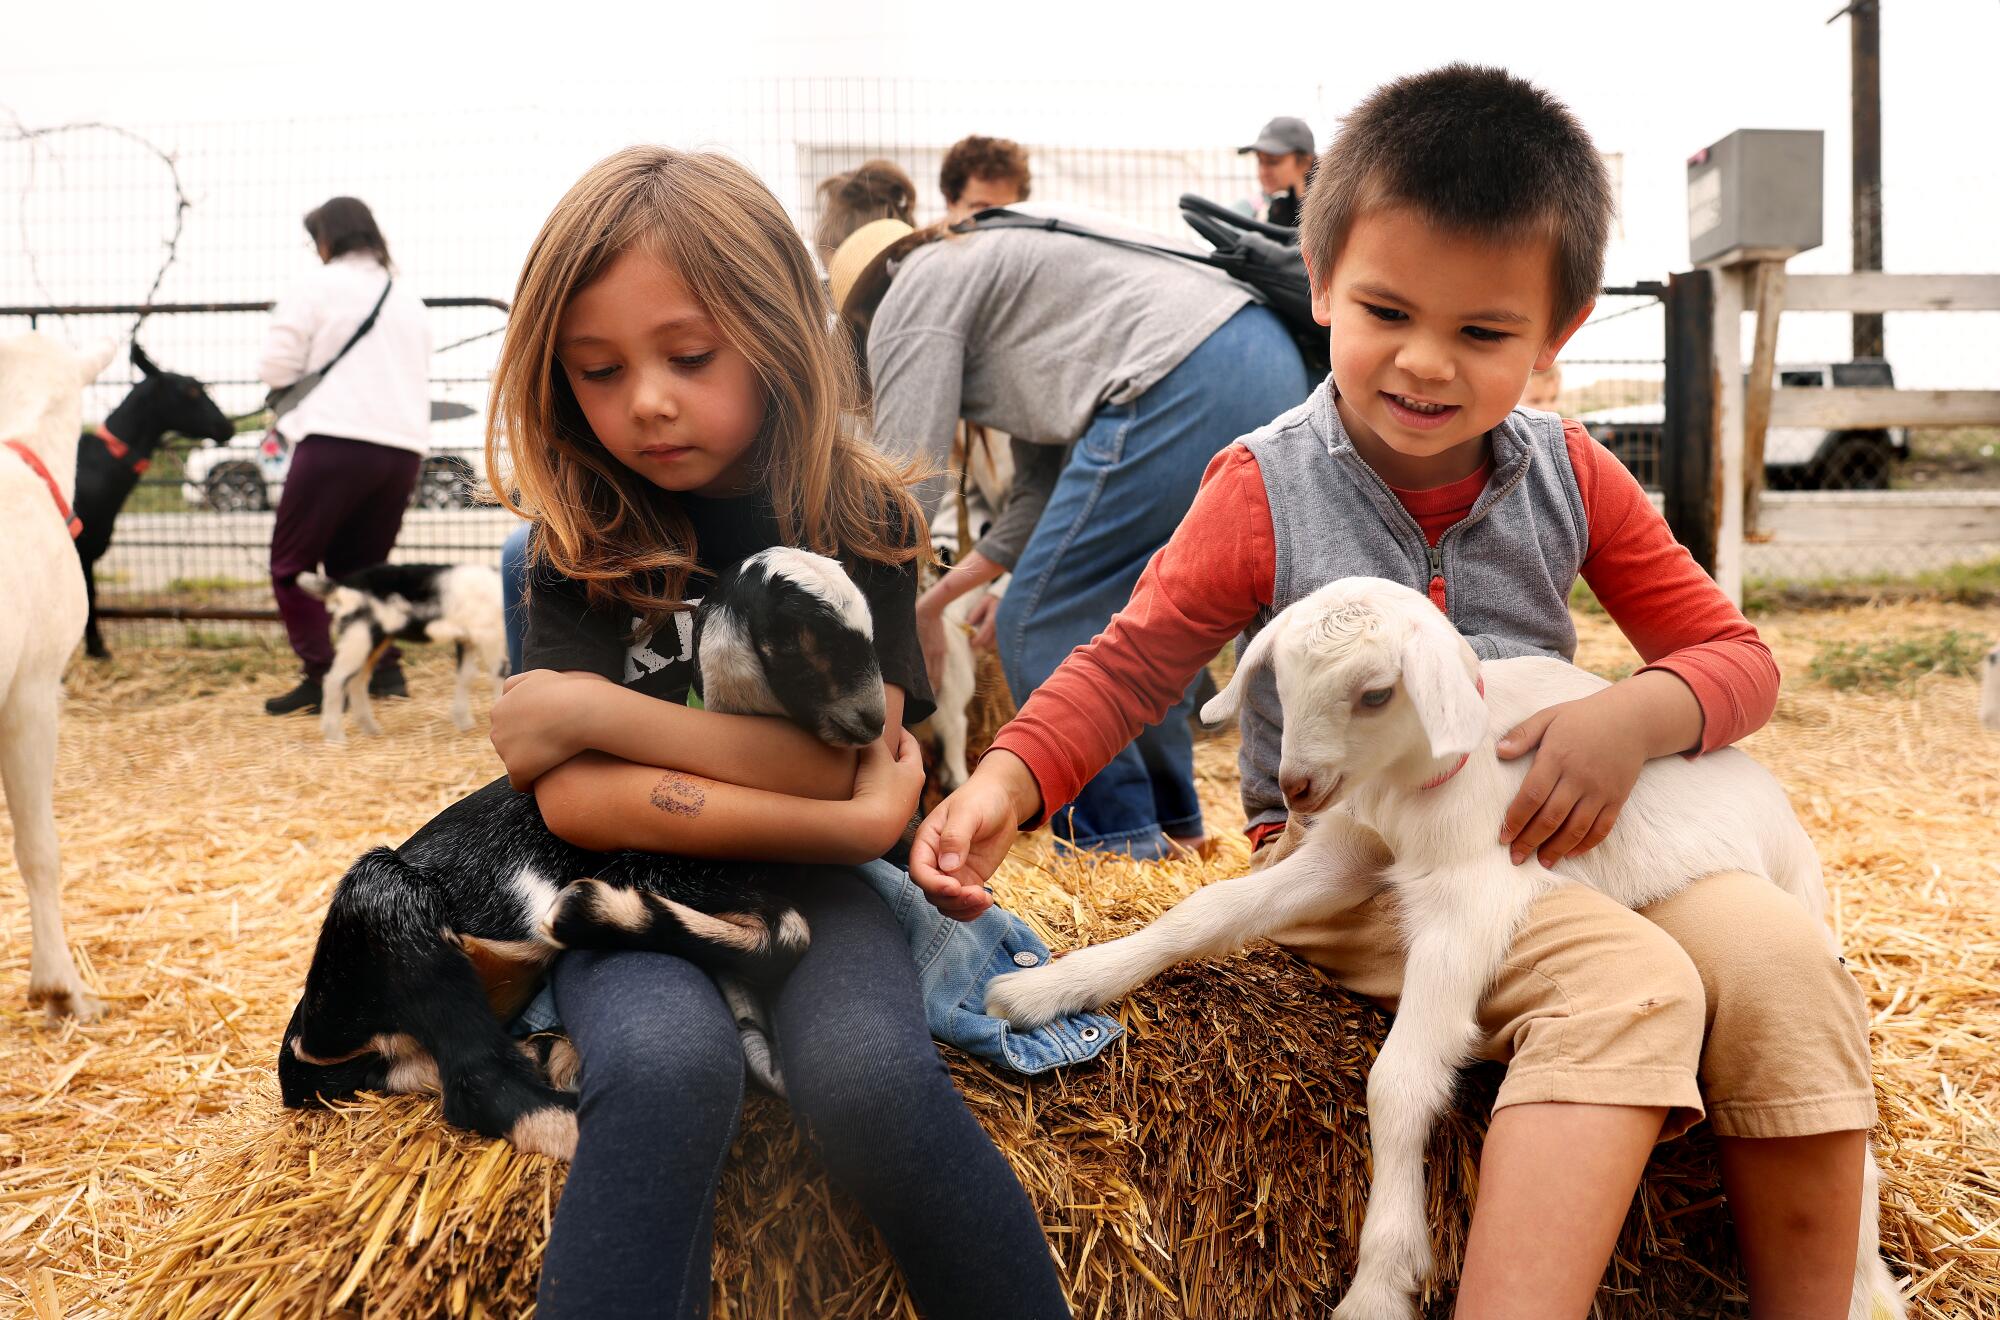 A 6-year-old and a 5-year-old hold baby goats at Drake Family Farms.